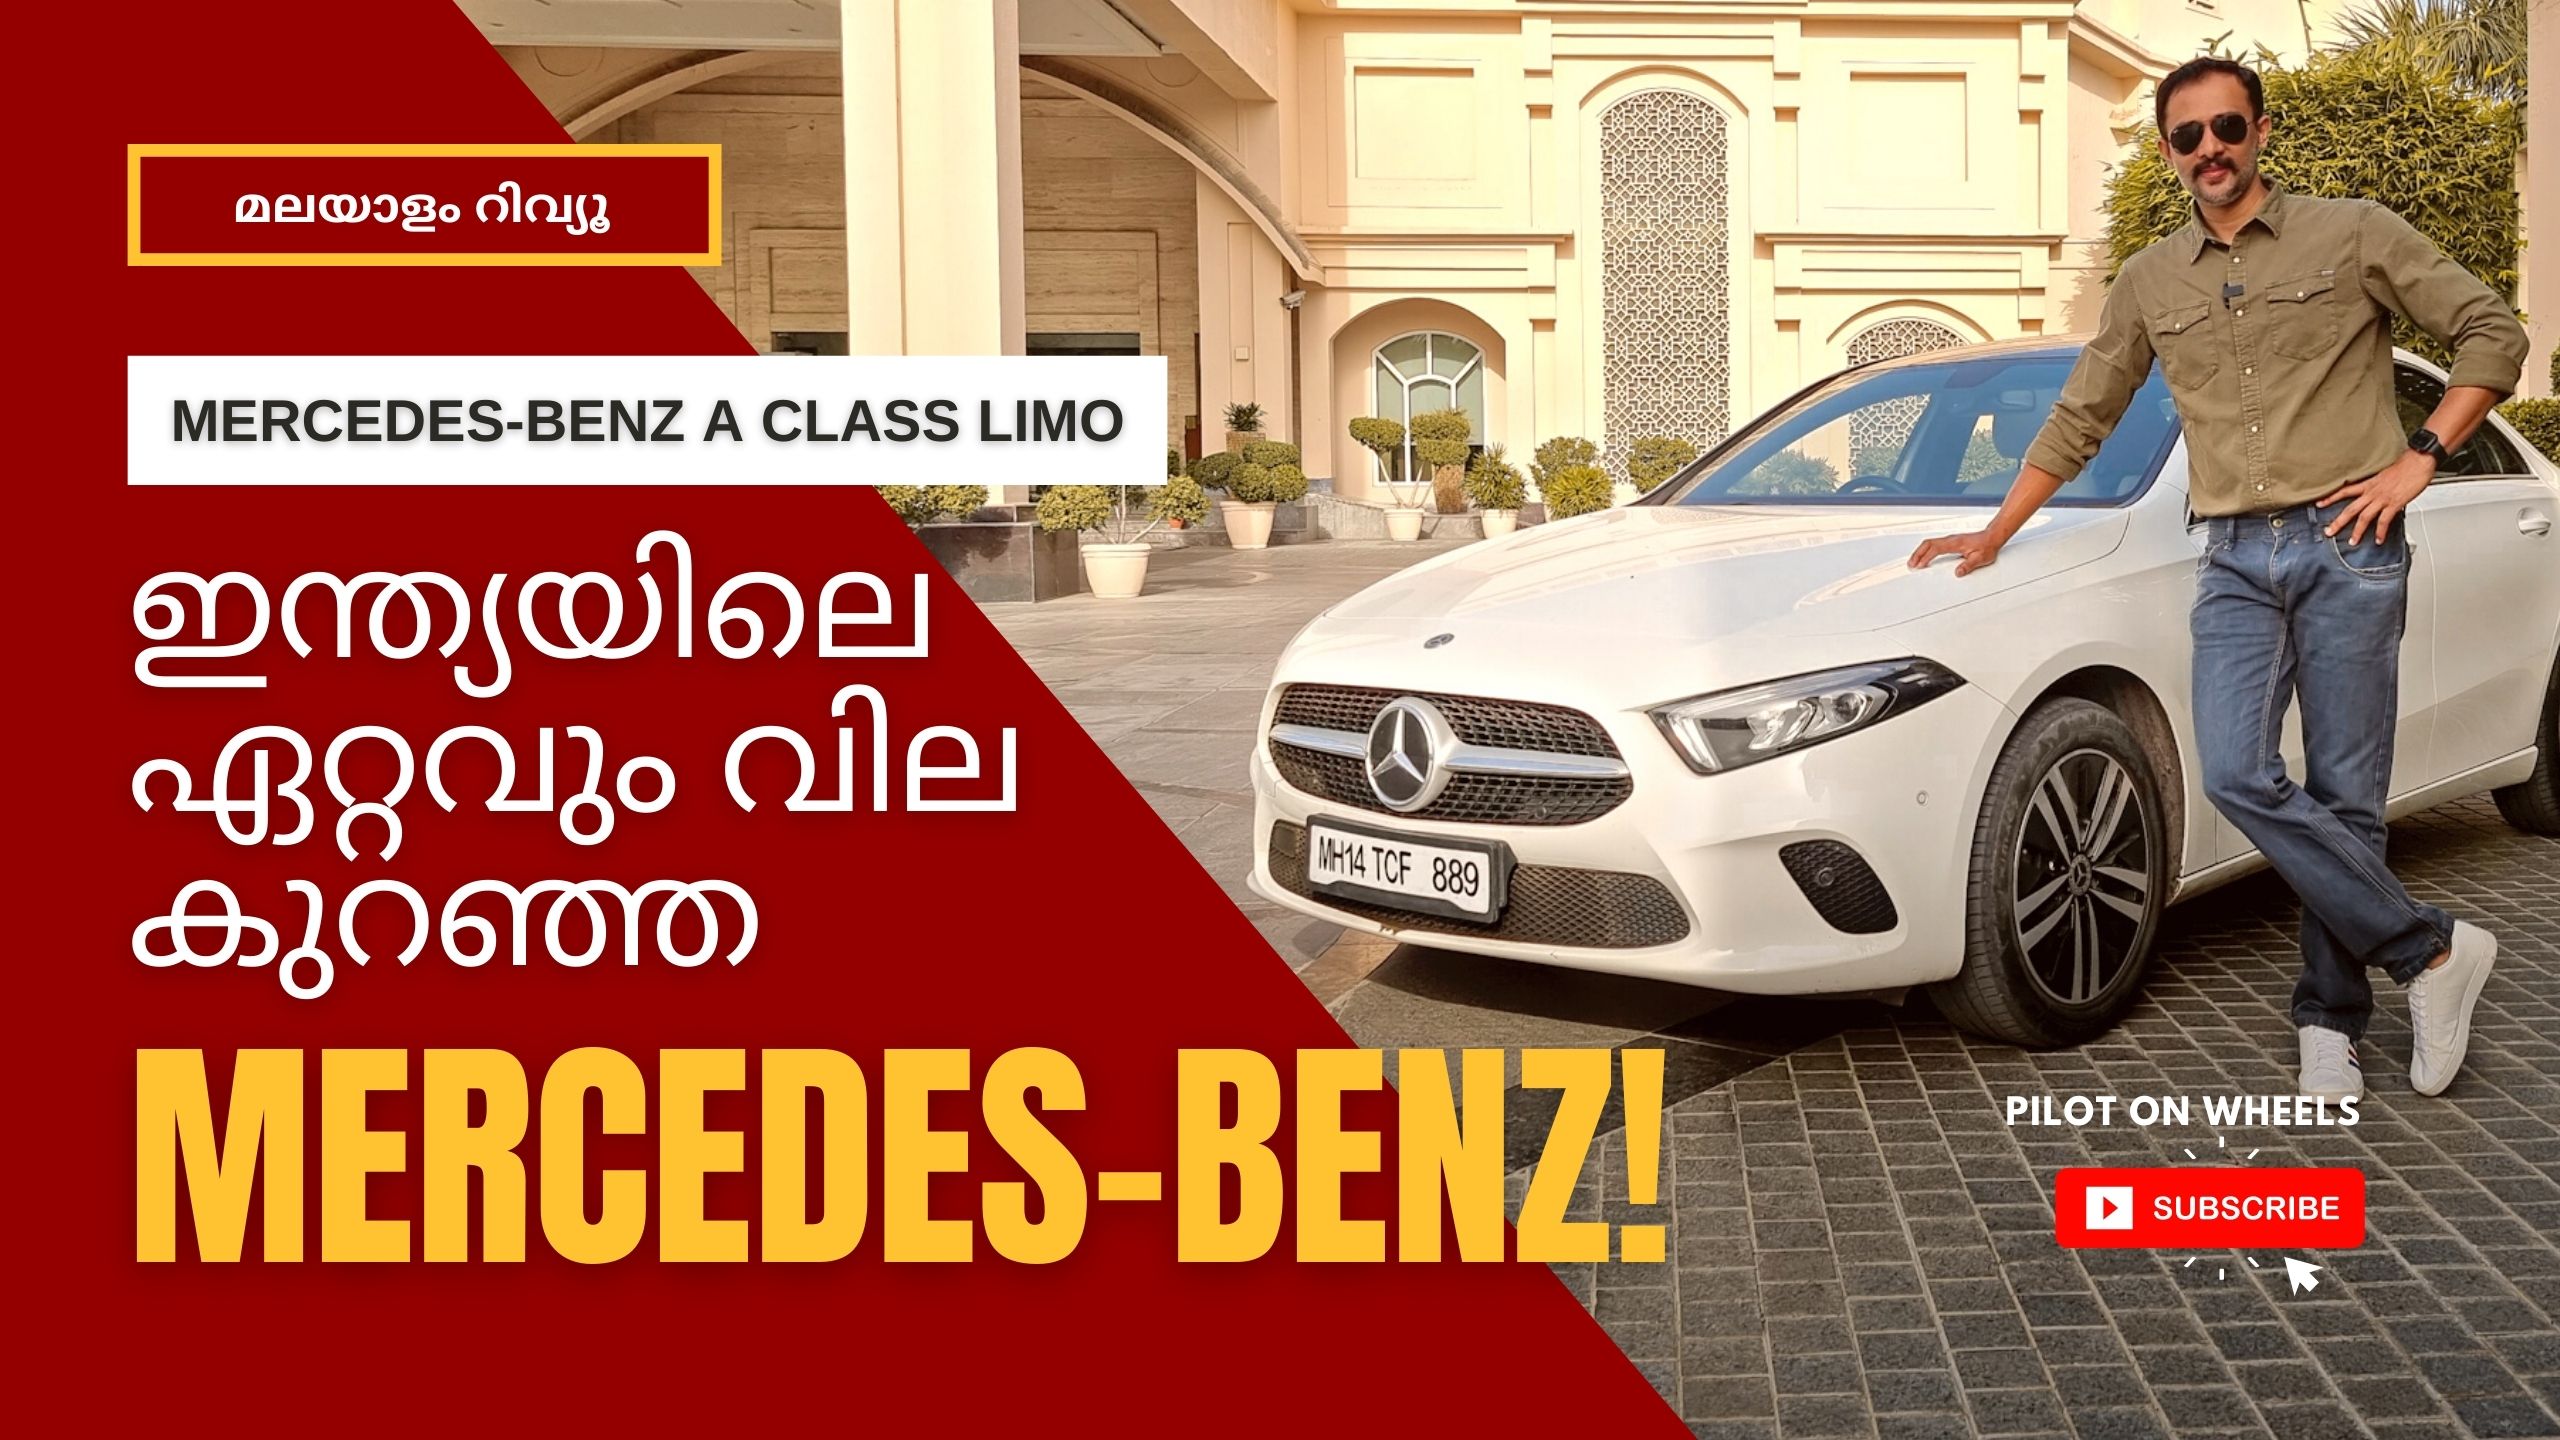 Mercedes Benz A-Class Limo Diesel Review